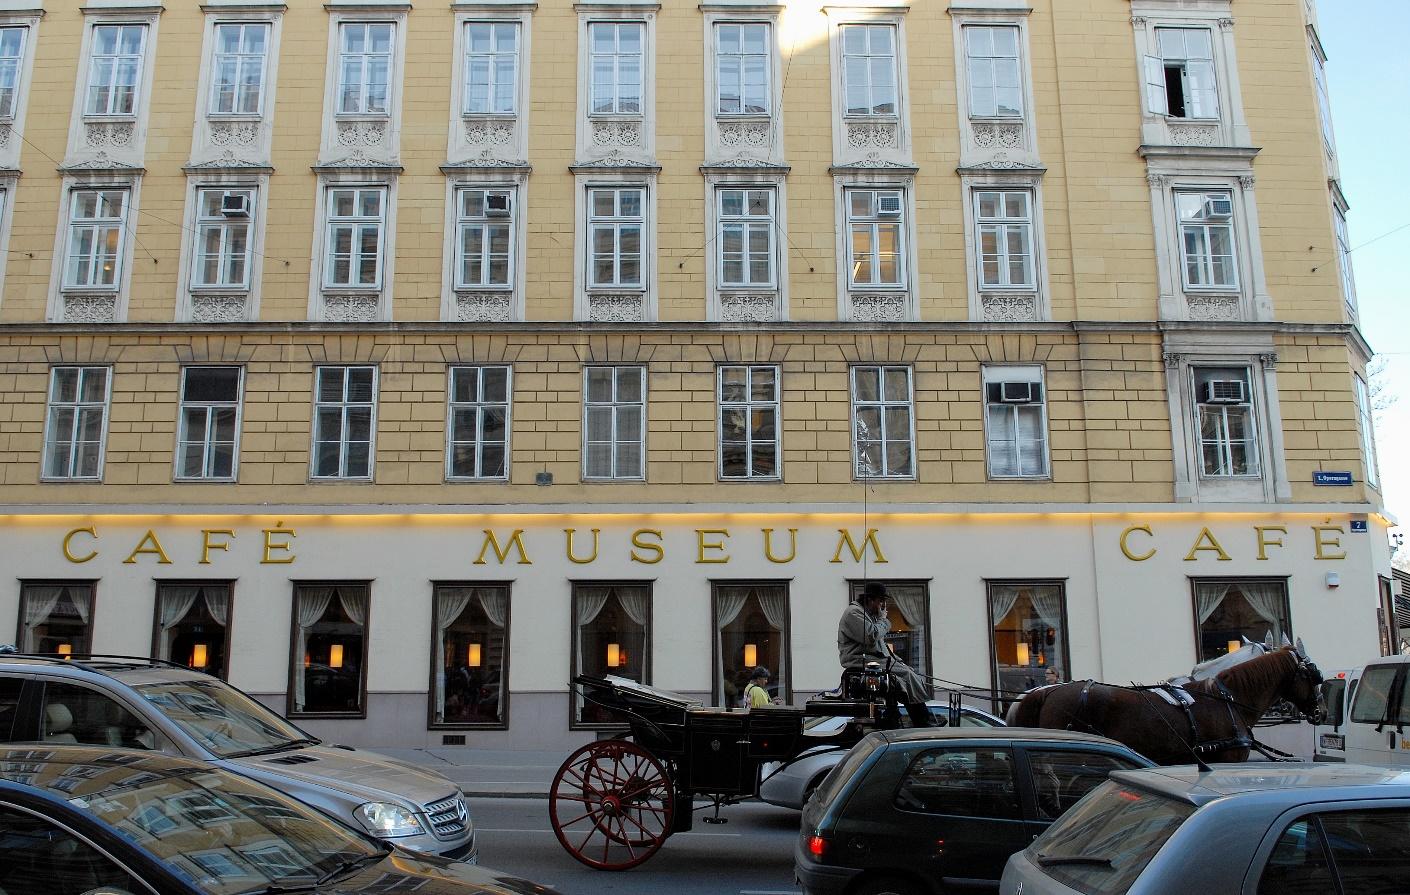  Café Museum, view from outside, Operngasse.